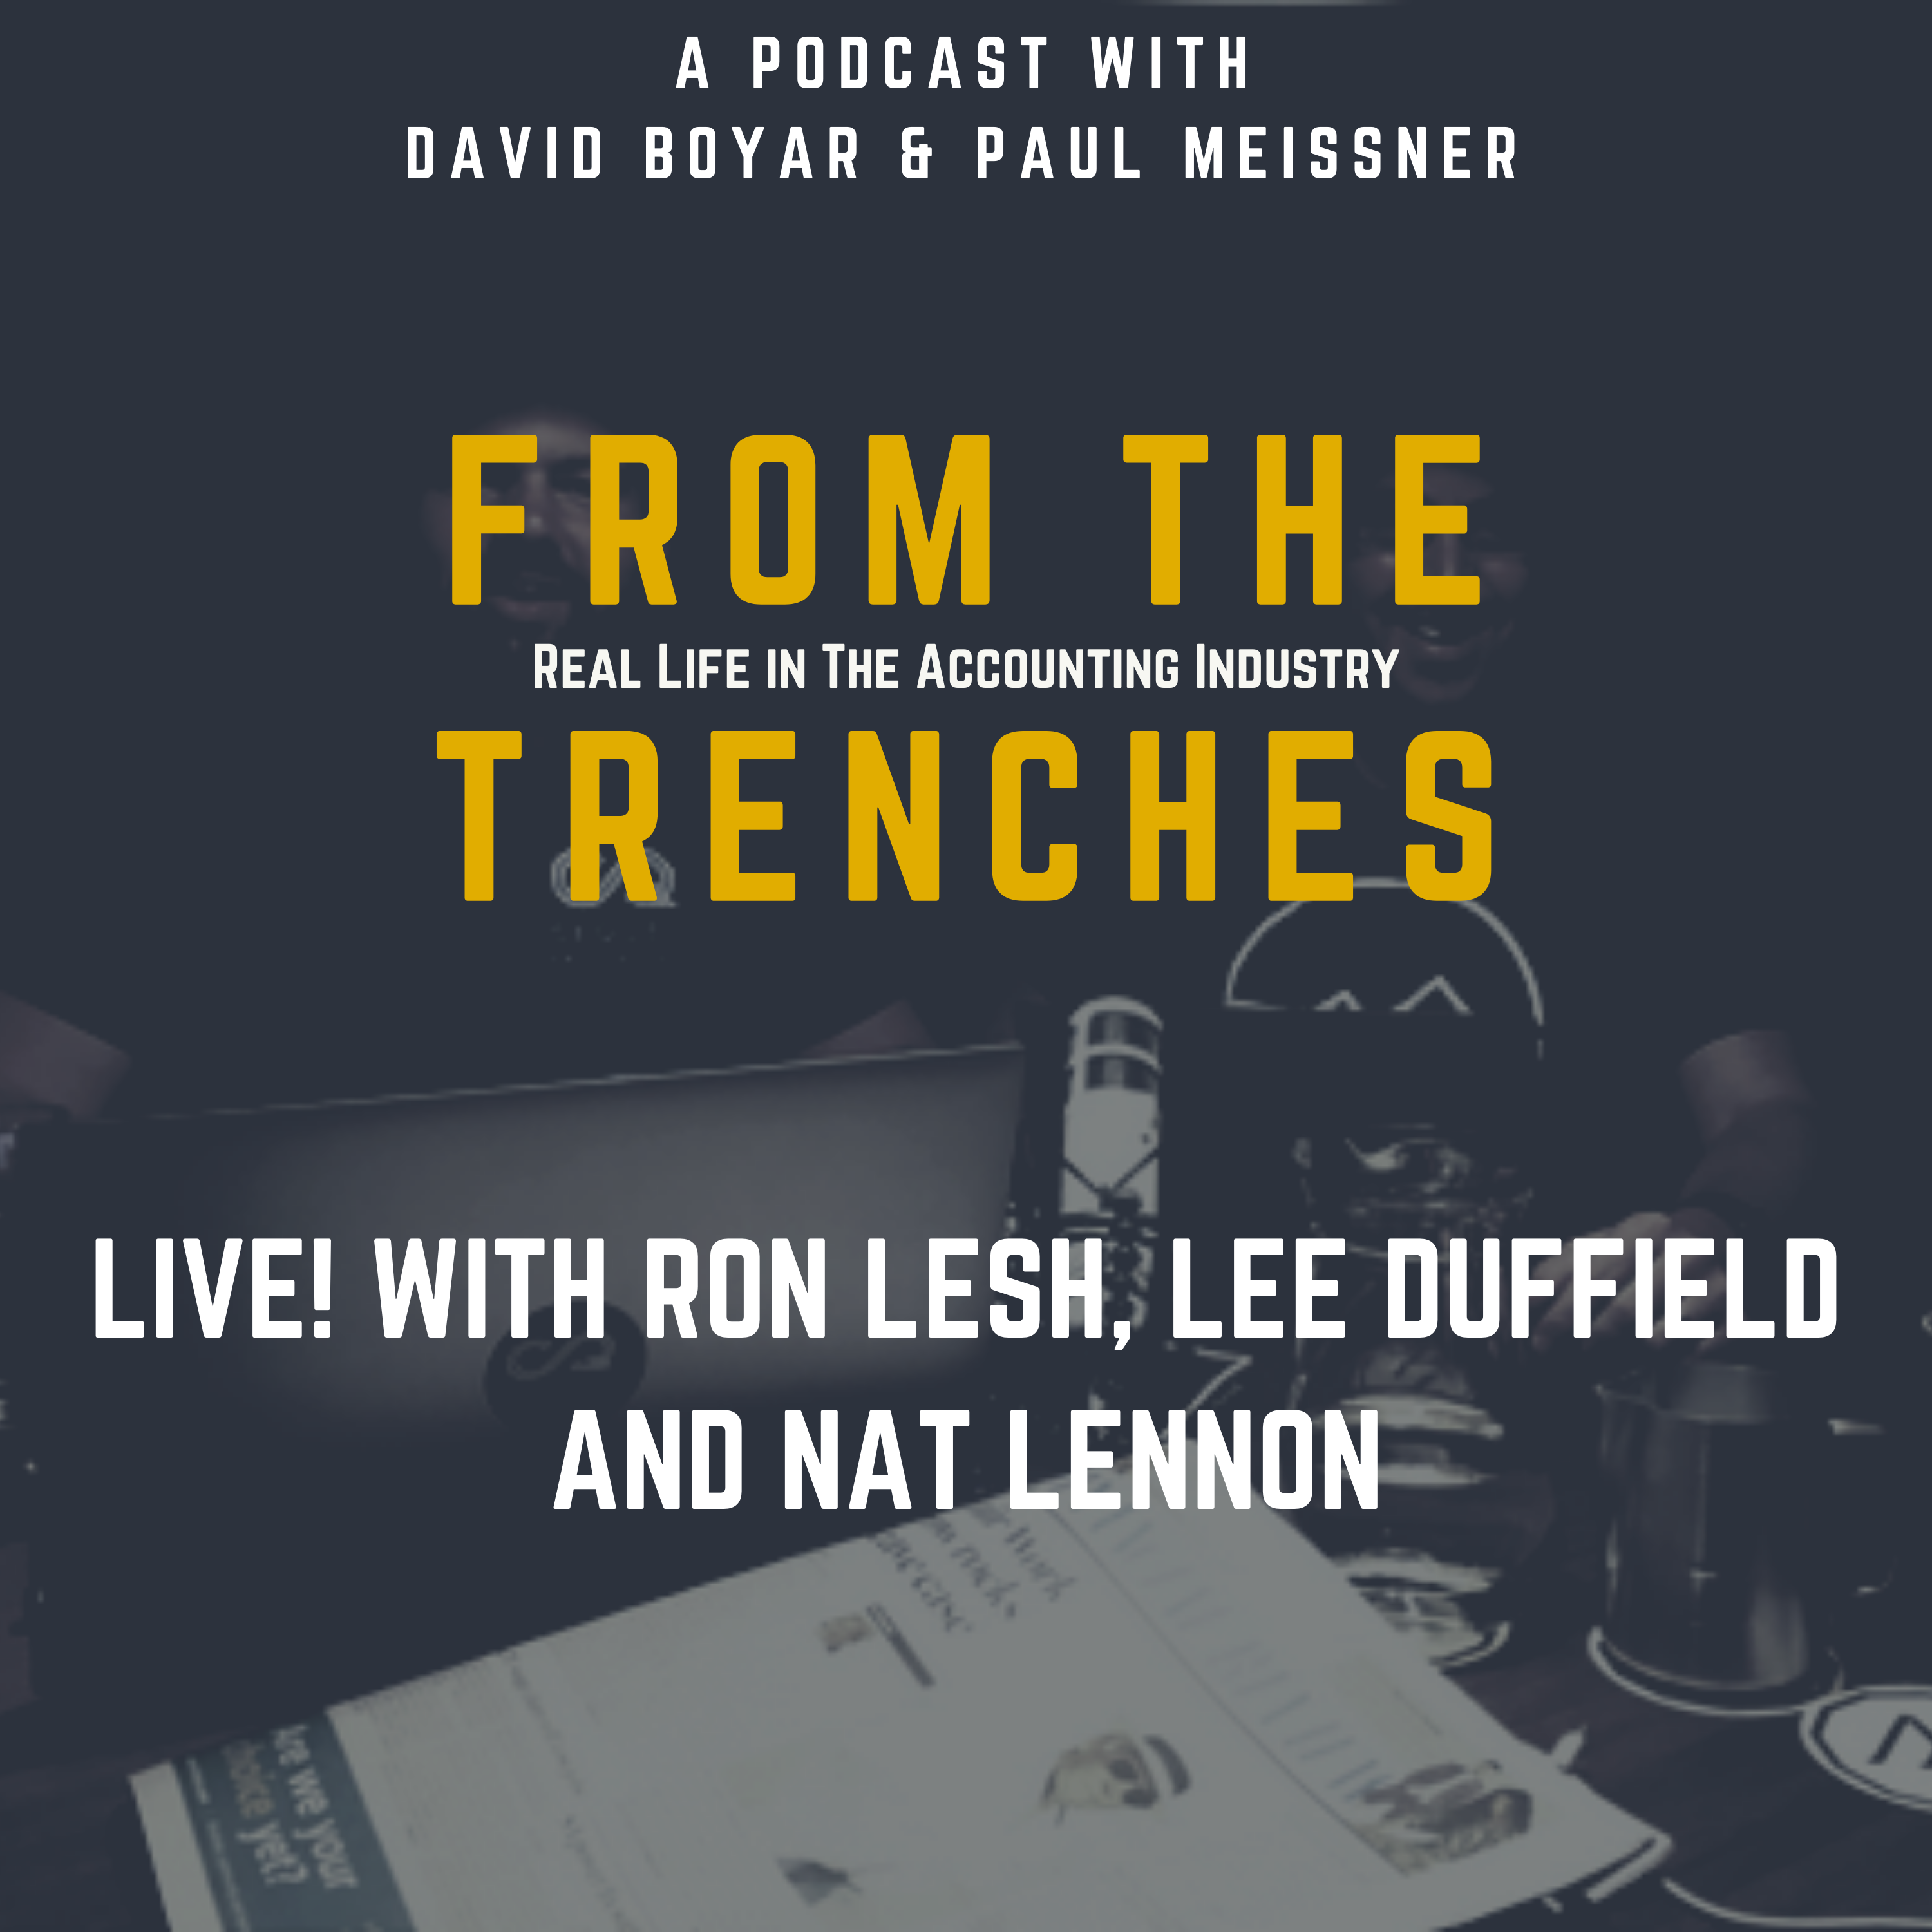 Live! With Ron Lesh, Lee Duffield and Nat Lennon